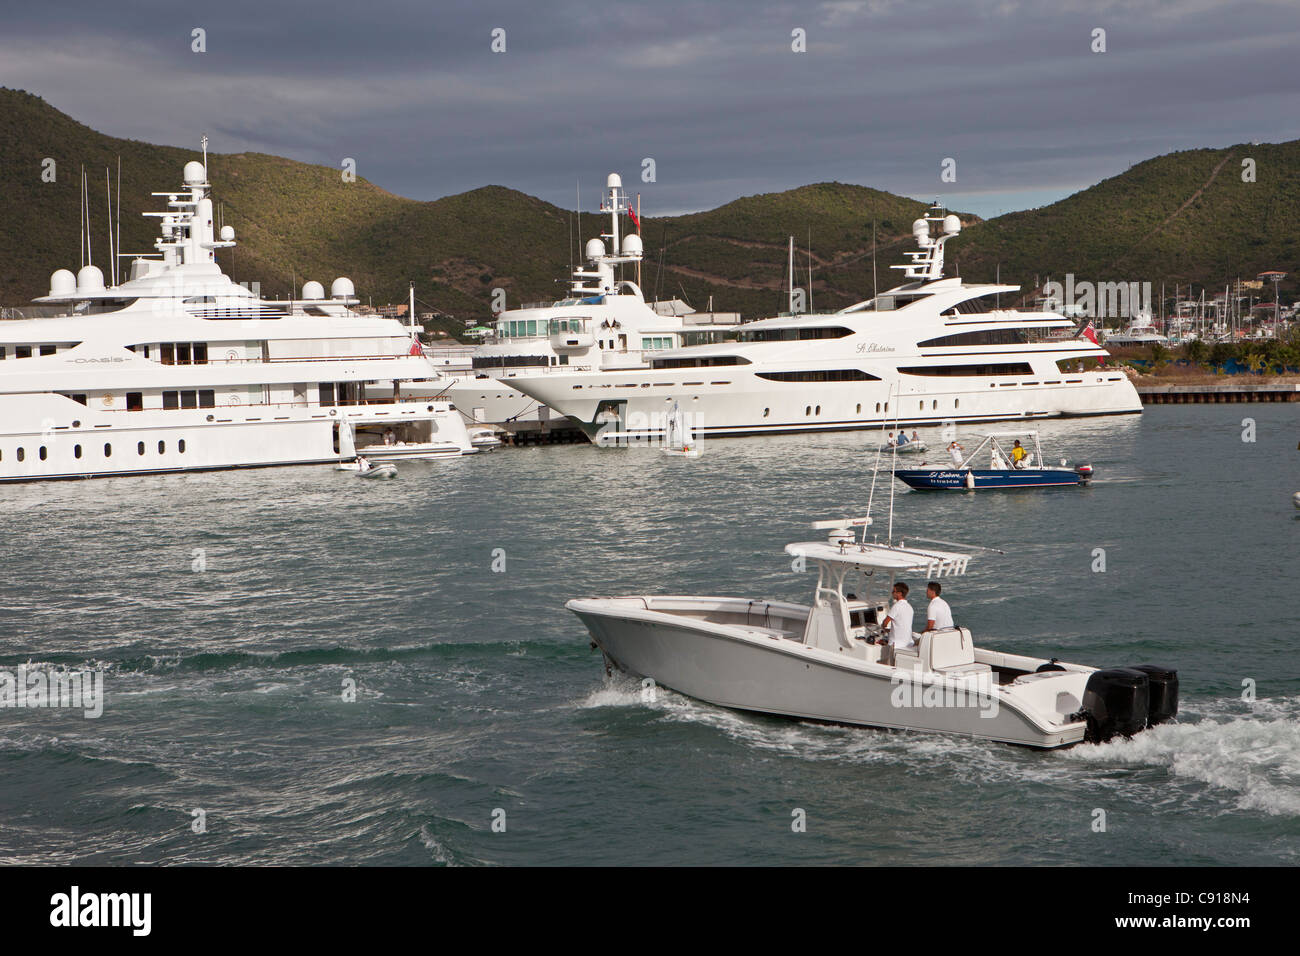 Caribbean island, independent from the Netherlands since 2010. Simpson Bay and Lagoon. Yachts during Heineken Regatta. Stock Photo